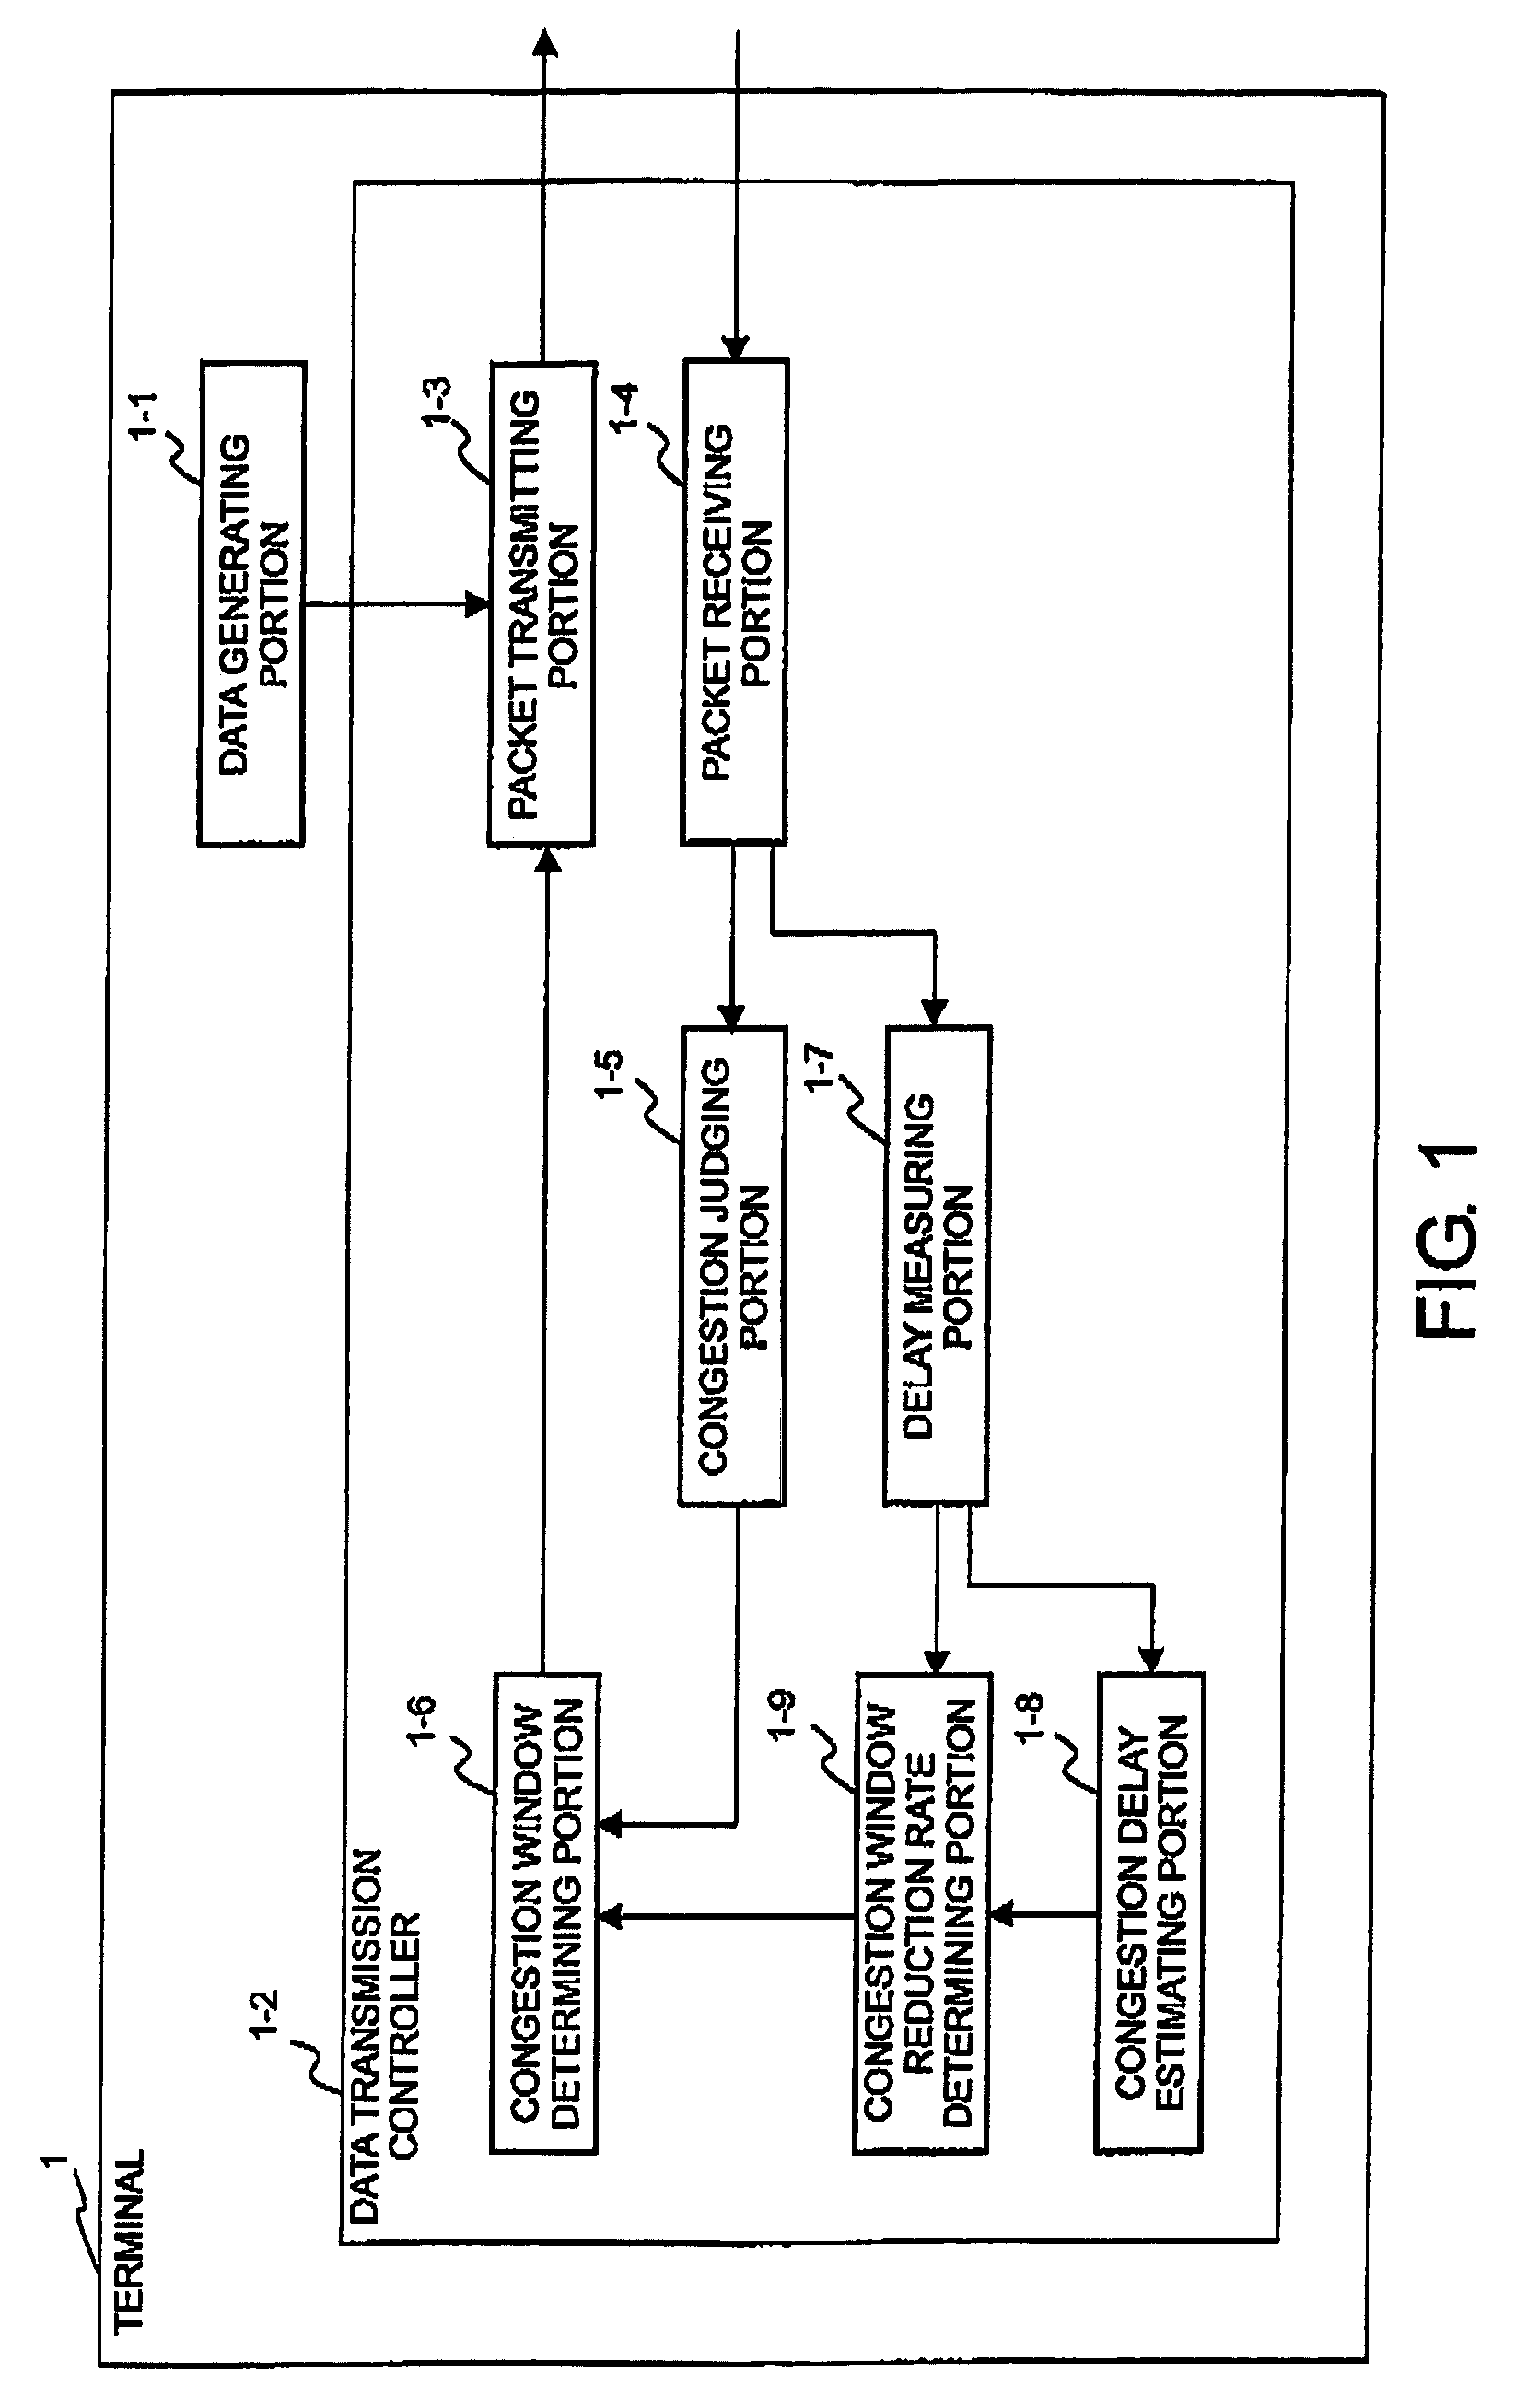 High-throughput communication system, communication terminal, session relay, and communication protocol